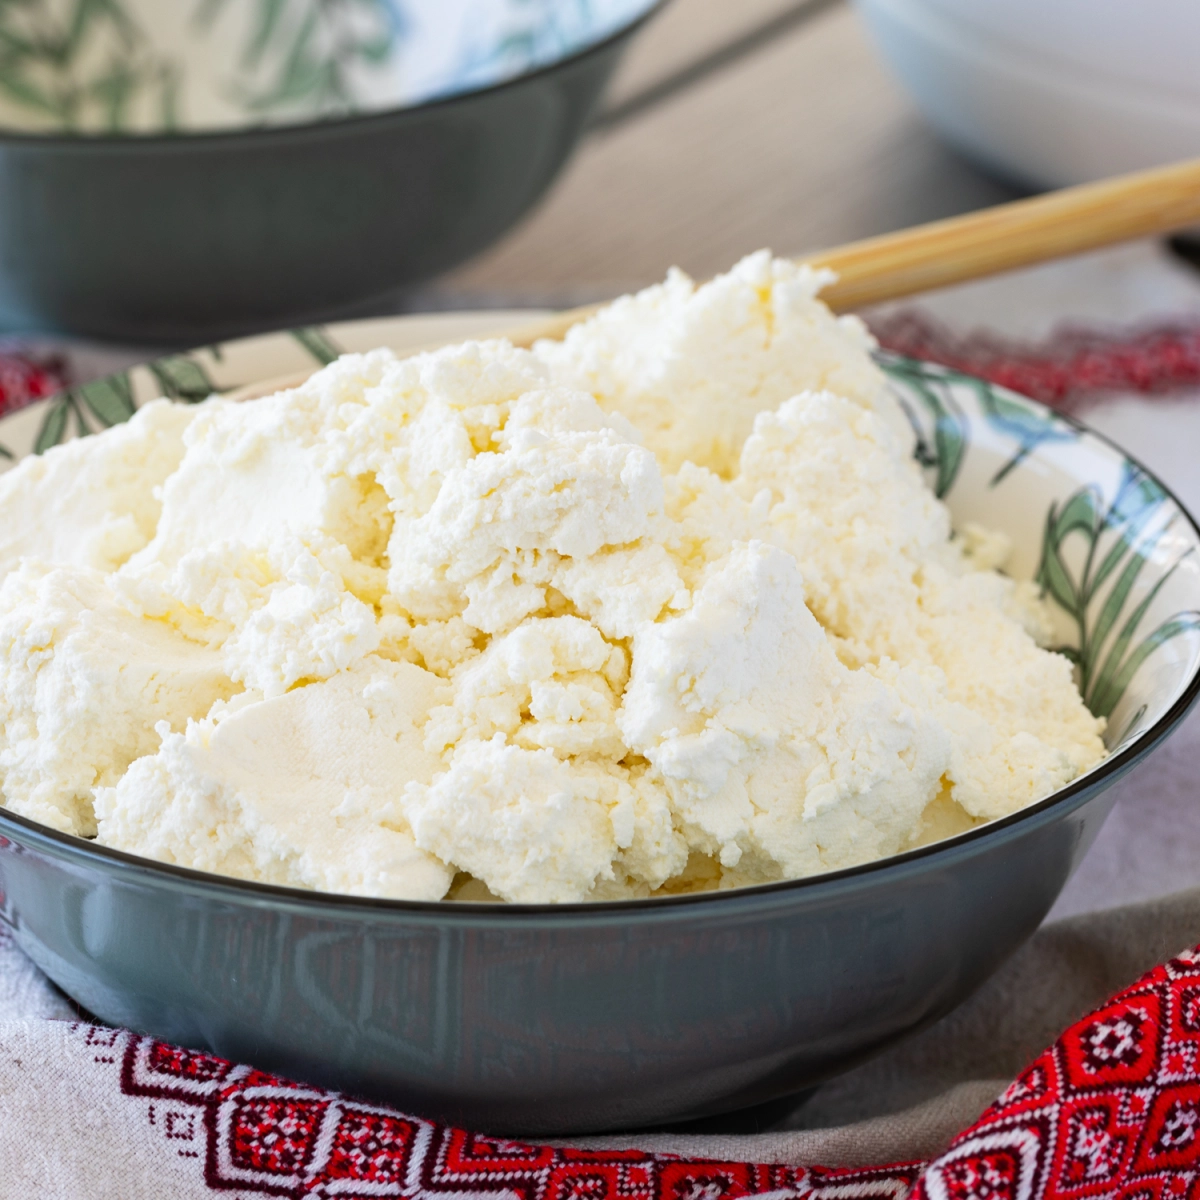 How to make Farmer’s Cottage Cheese at home